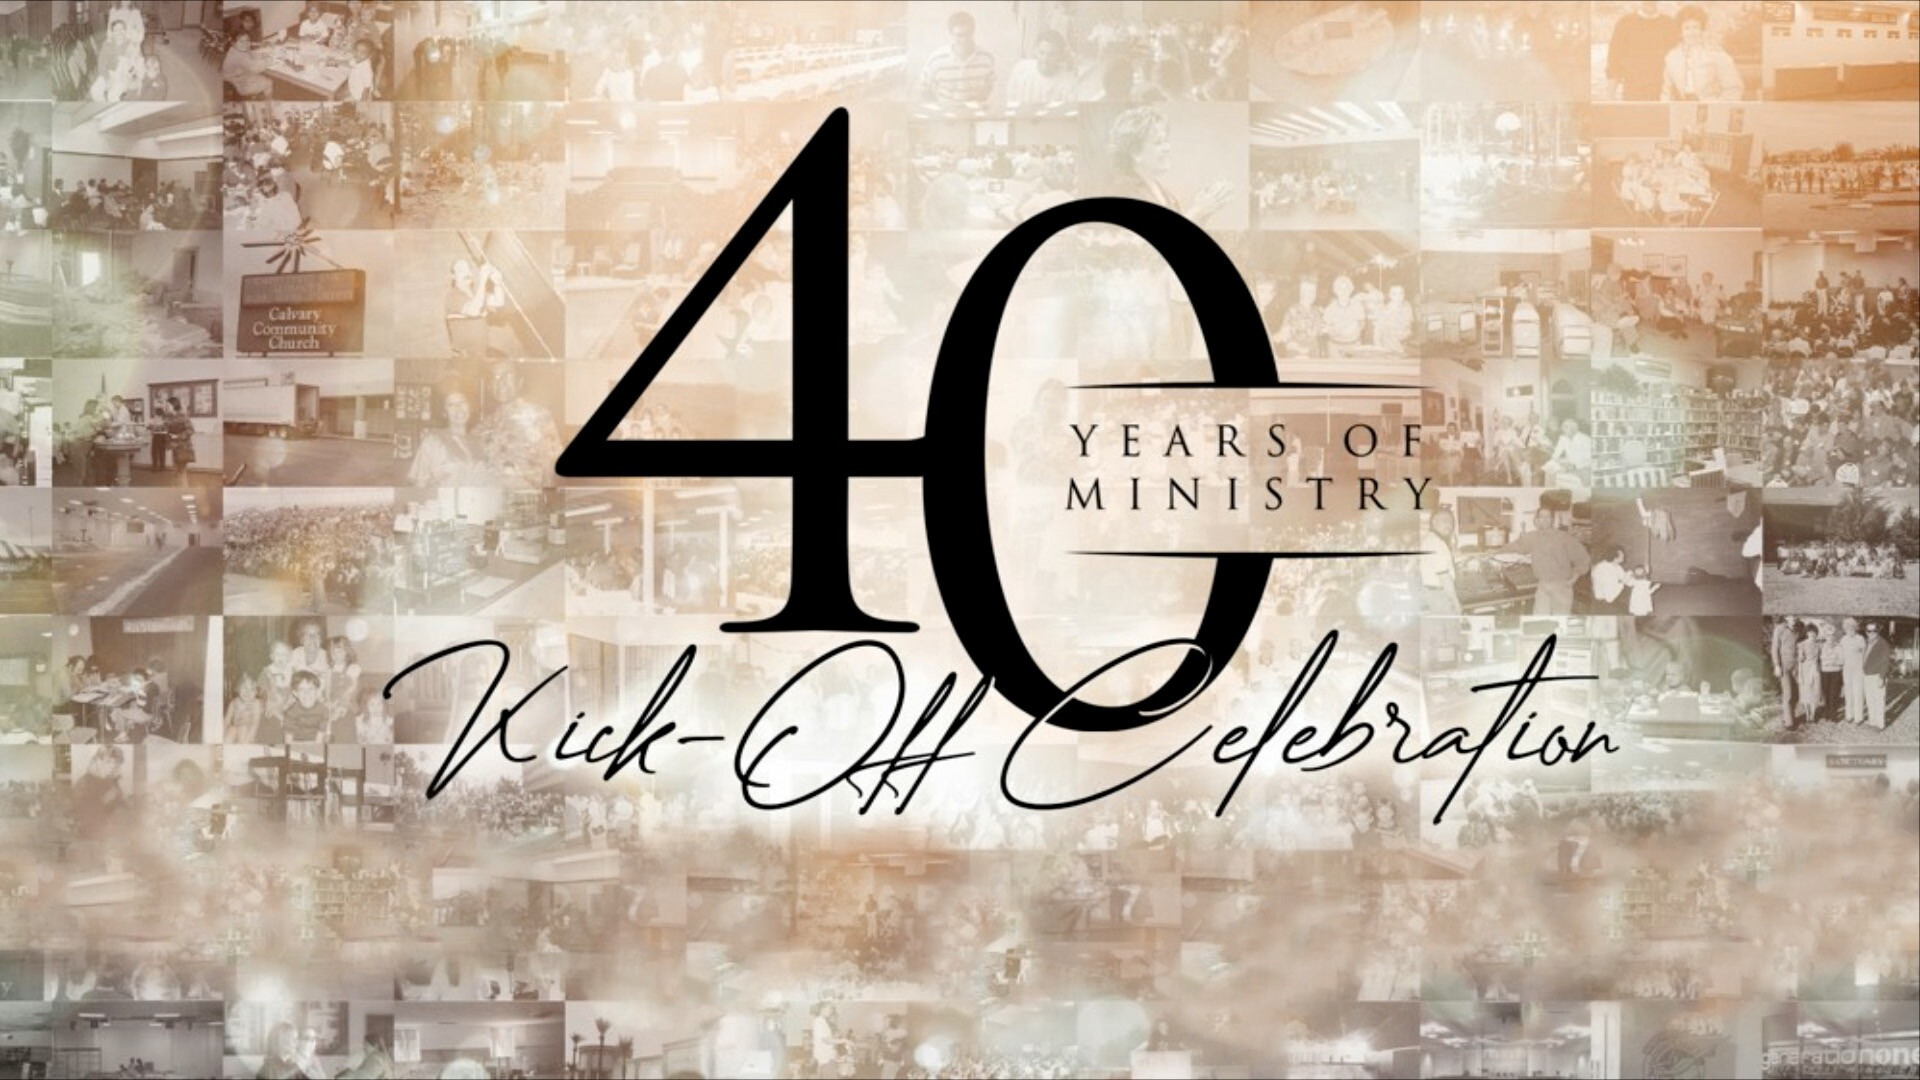 40 Years of Ministry - Kick-Off Celebration